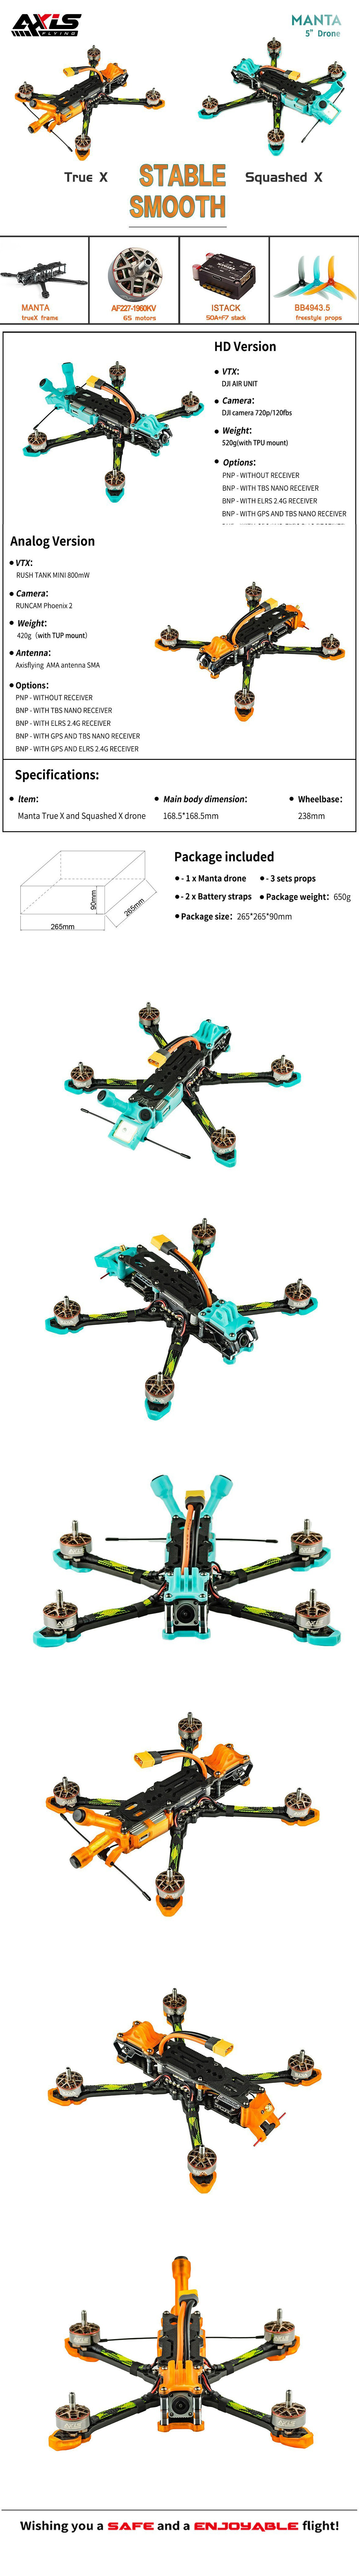 Axisflying MANTA5" / HD BNF / 5inch fpv freestyle Ture X / Squashed X drone with GPS MANTA 5" DRONE  cinematic drone,cinewhoop drone,longrange drone,freestyle drone,fpv drone,fpv quads,5inch freestyle drone,7inch longrange drone,5inch quads,6inch quads,7inch LR quads,7" fpv drone,7" fpv quads,7" longrange quads,6" cinematic quads,5"cinematic drone